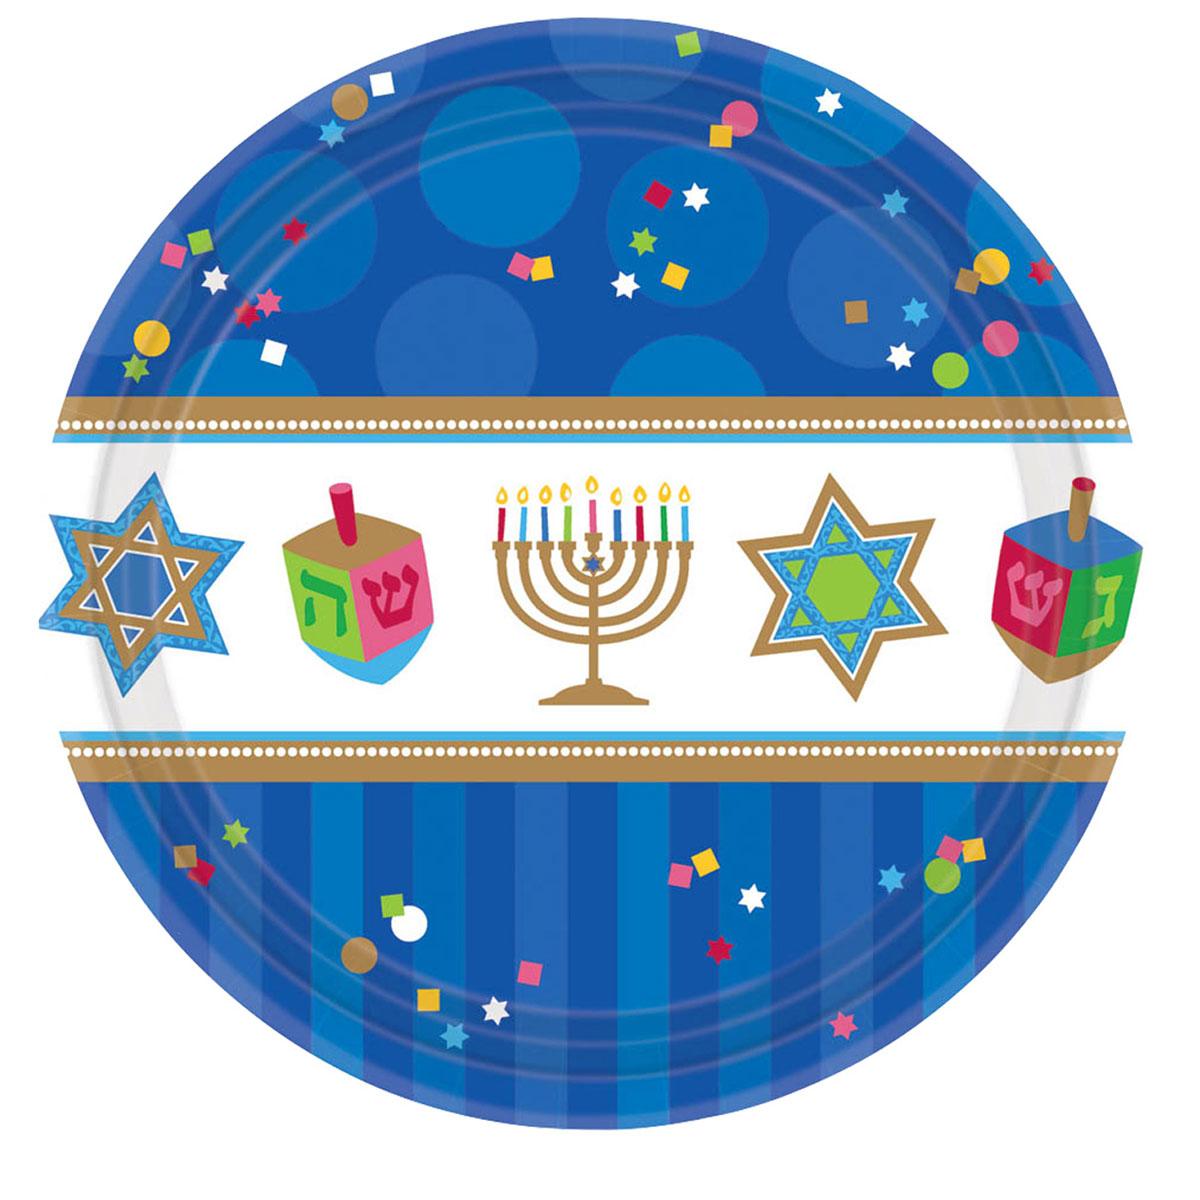 Hanukkah Celebrations Paper Plates 26cm - pk18 by Amscan 723803 available here at Karnival Costumes online party shop